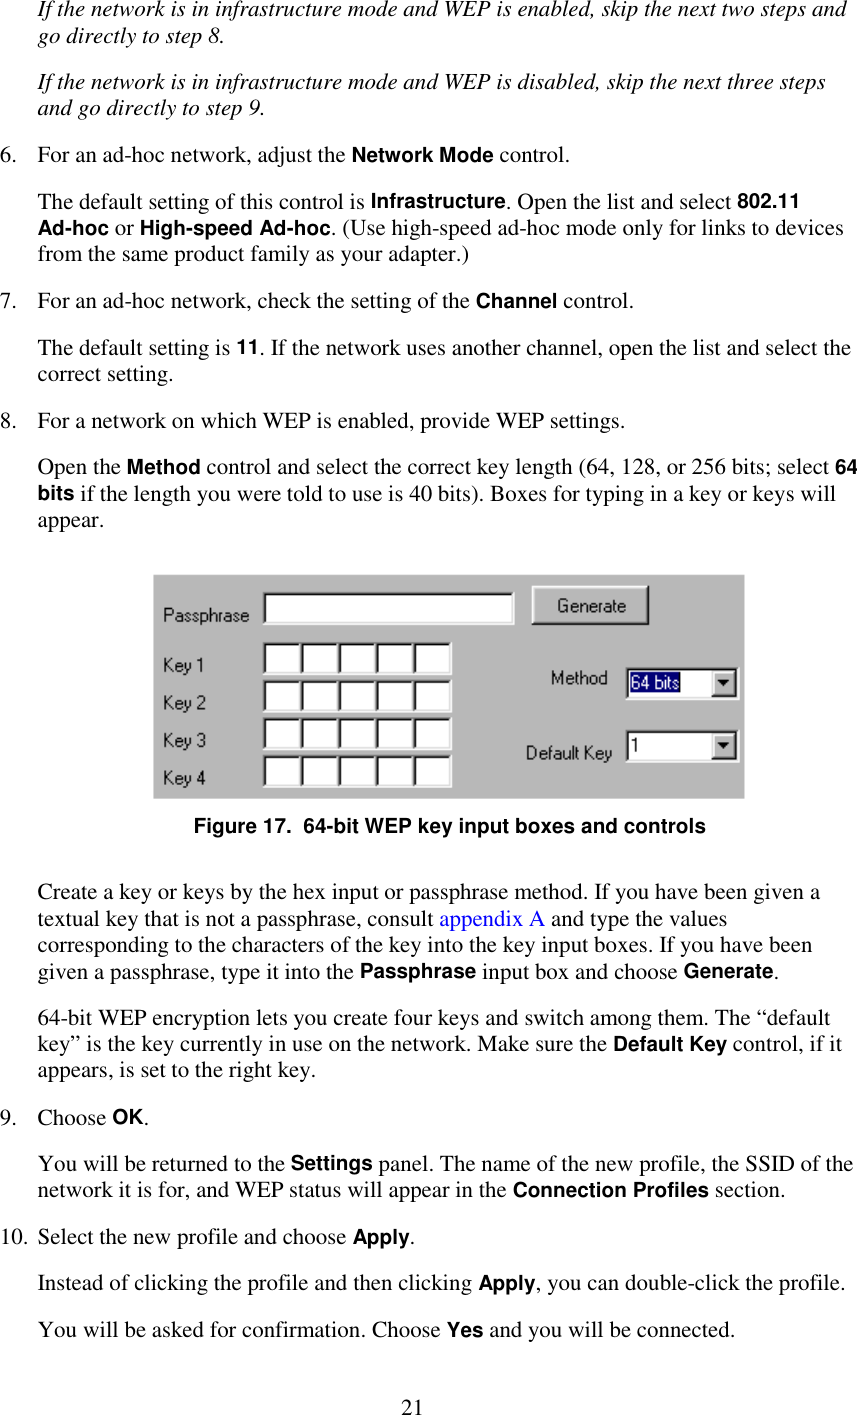   21 If the network is in infrastructure mode and WEP is enabled, skip the next two steps and go directly to step 8. If the network is in infrastructure mode and WEP is disabled, skip the next three steps and go directly to step 9. 6.  For an ad-hoc network, adjust the Network Mode control. The default setting of this control is Infrastructure. Open the list and select 802.11 Ad-hoc or High-speed Ad-hoc. (Use high-speed ad-hoc mode only for links to devices from the same product family as your adapter.) 7.  For an ad-hoc network, check the setting of the Channel control. The default setting is 11. If the network uses another channel, open the list and select the correct setting. 8.  For a network on which WEP is enabled, provide WEP settings. Open the Method control and select the correct key length (64, 128, or 256 bits; select 64 bits if the length you were told to use is 40 bits). Boxes for typing in a key or keys will appear.  Figure 17.  64-bit WEP key input boxes and controls Create a key or keys by the hex input or passphrase method. If you have been given a textual key that is not a passphrase, consult appendix A and type the values corresponding to the characters of the key into the key input boxes. If you have been given a passphrase, type it into the Passphrase input box and choose Generate. 64-bit WEP encryption lets you create four keys and switch among them. The “default key” is the key currently in use on the network. Make sure the Default Key control, if it appears, is set to the right key. 9. Choose OK. You will be returned to the Settings panel. The name of the new profile, the SSID of the network it is for, and WEP status will appear in the Connection Profiles section. 10. Select the new profile and choose Apply. Instead of clicking the profile and then clicking Apply, you can double-click the profile. You will be asked for confirmation. Choose Yes and you will be connected. 